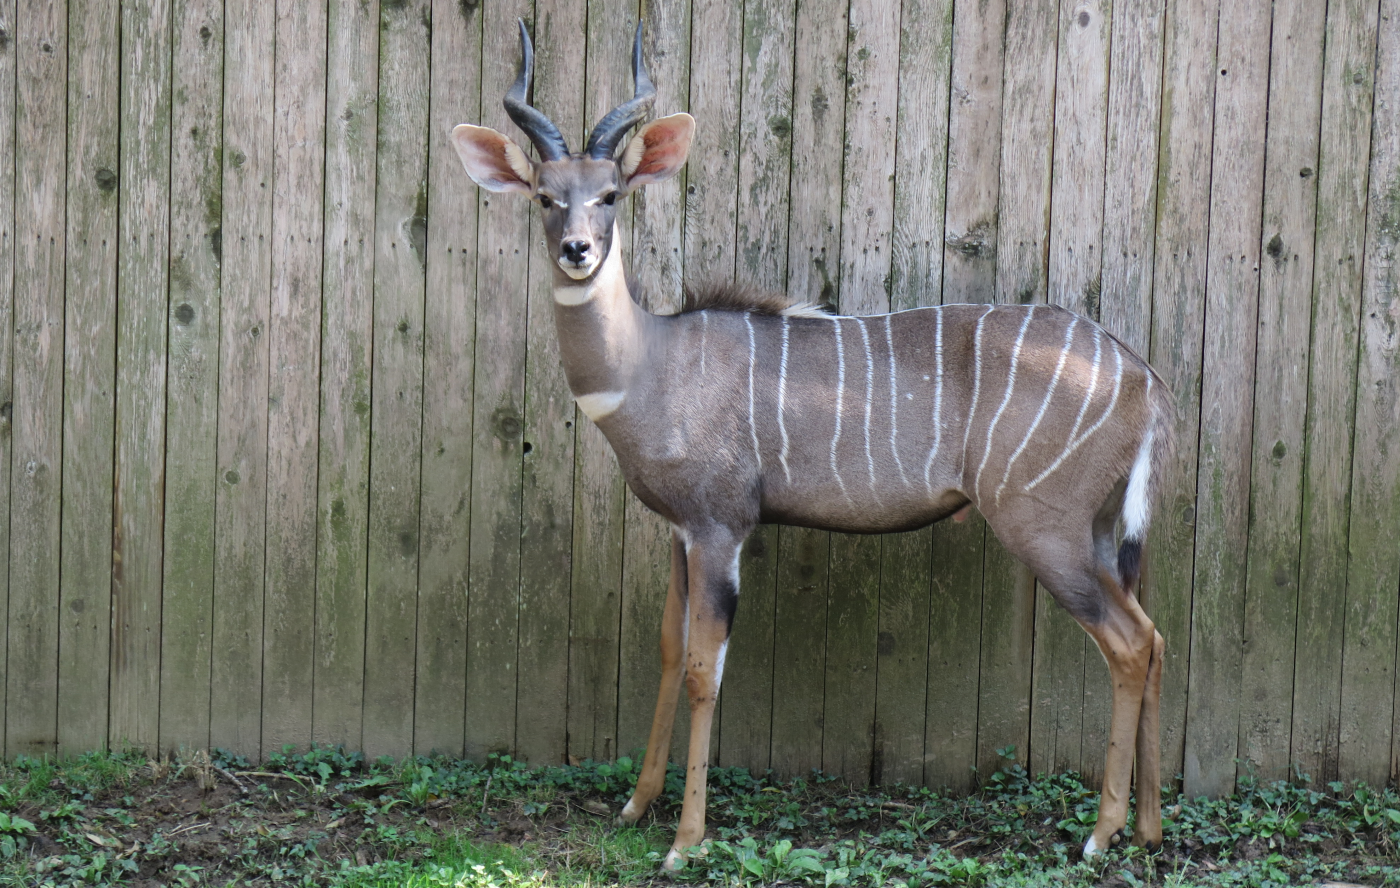 Male lesser kudu, Kushu, stands in front of a wooden fence.